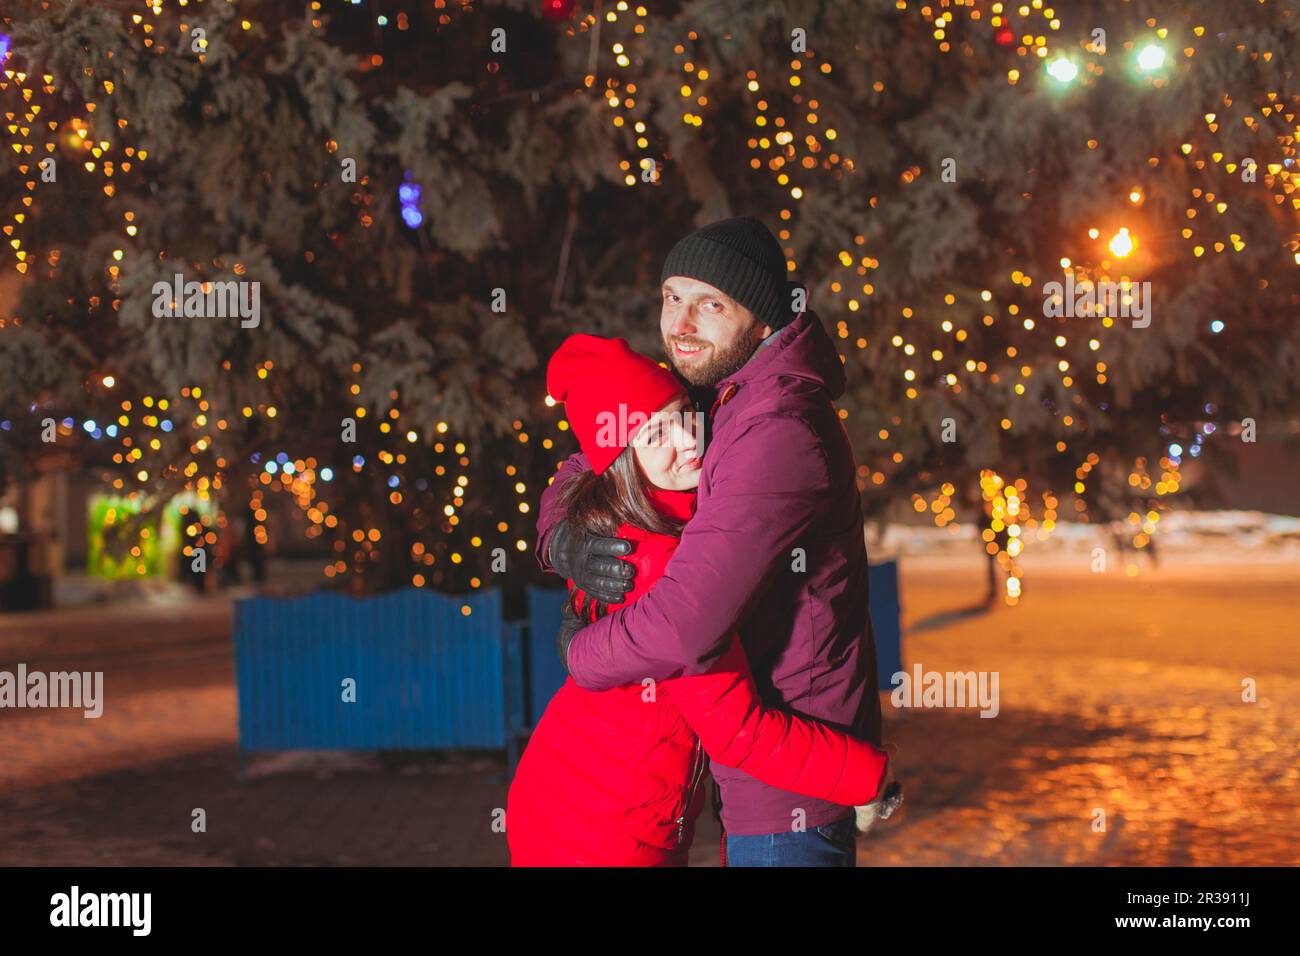 Hugging couple on the evening winter city square Stock Photo